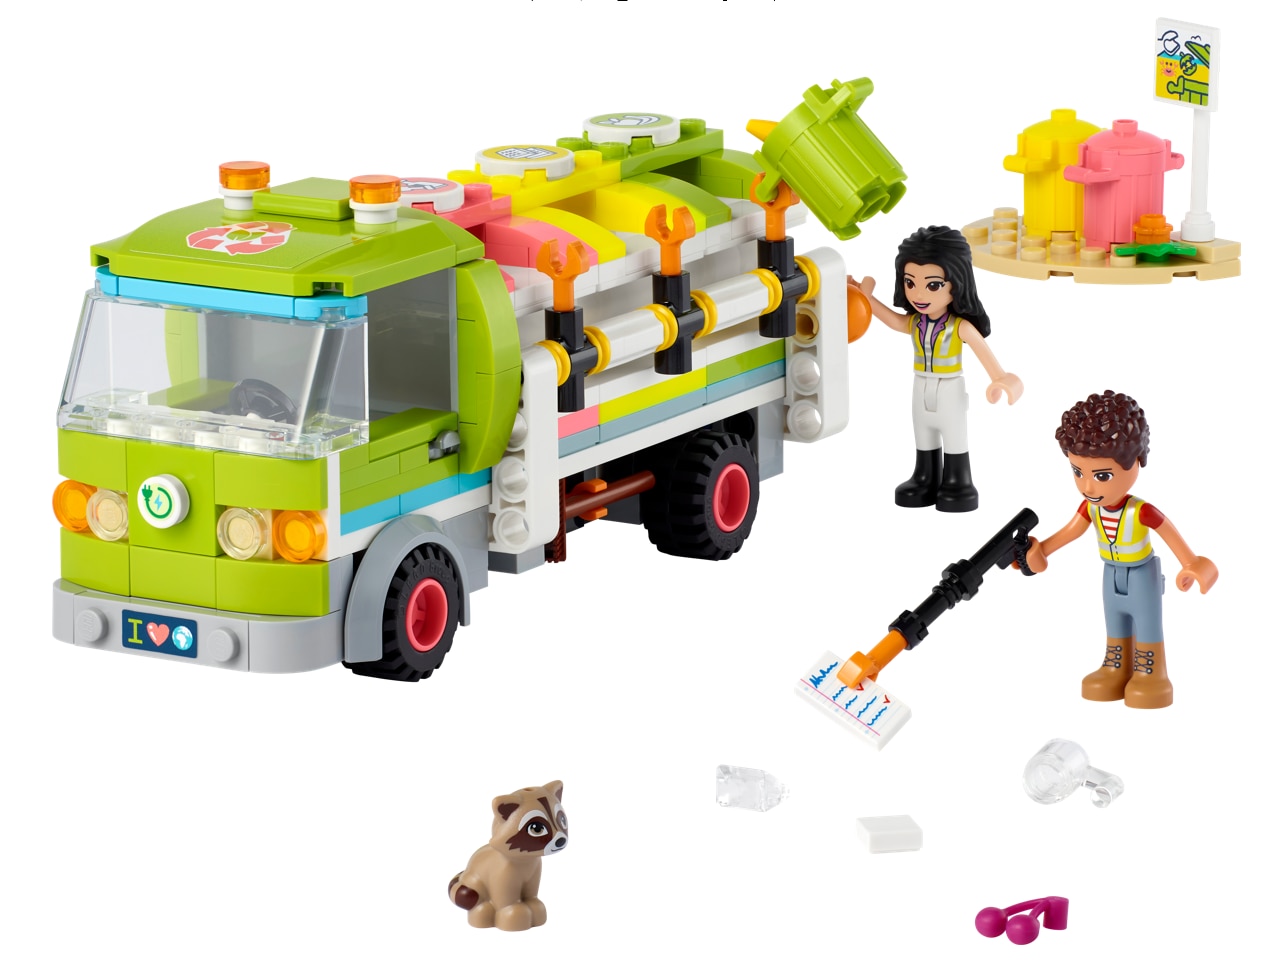 A picture containing LEGO, toy, indoor

Description automatically generated